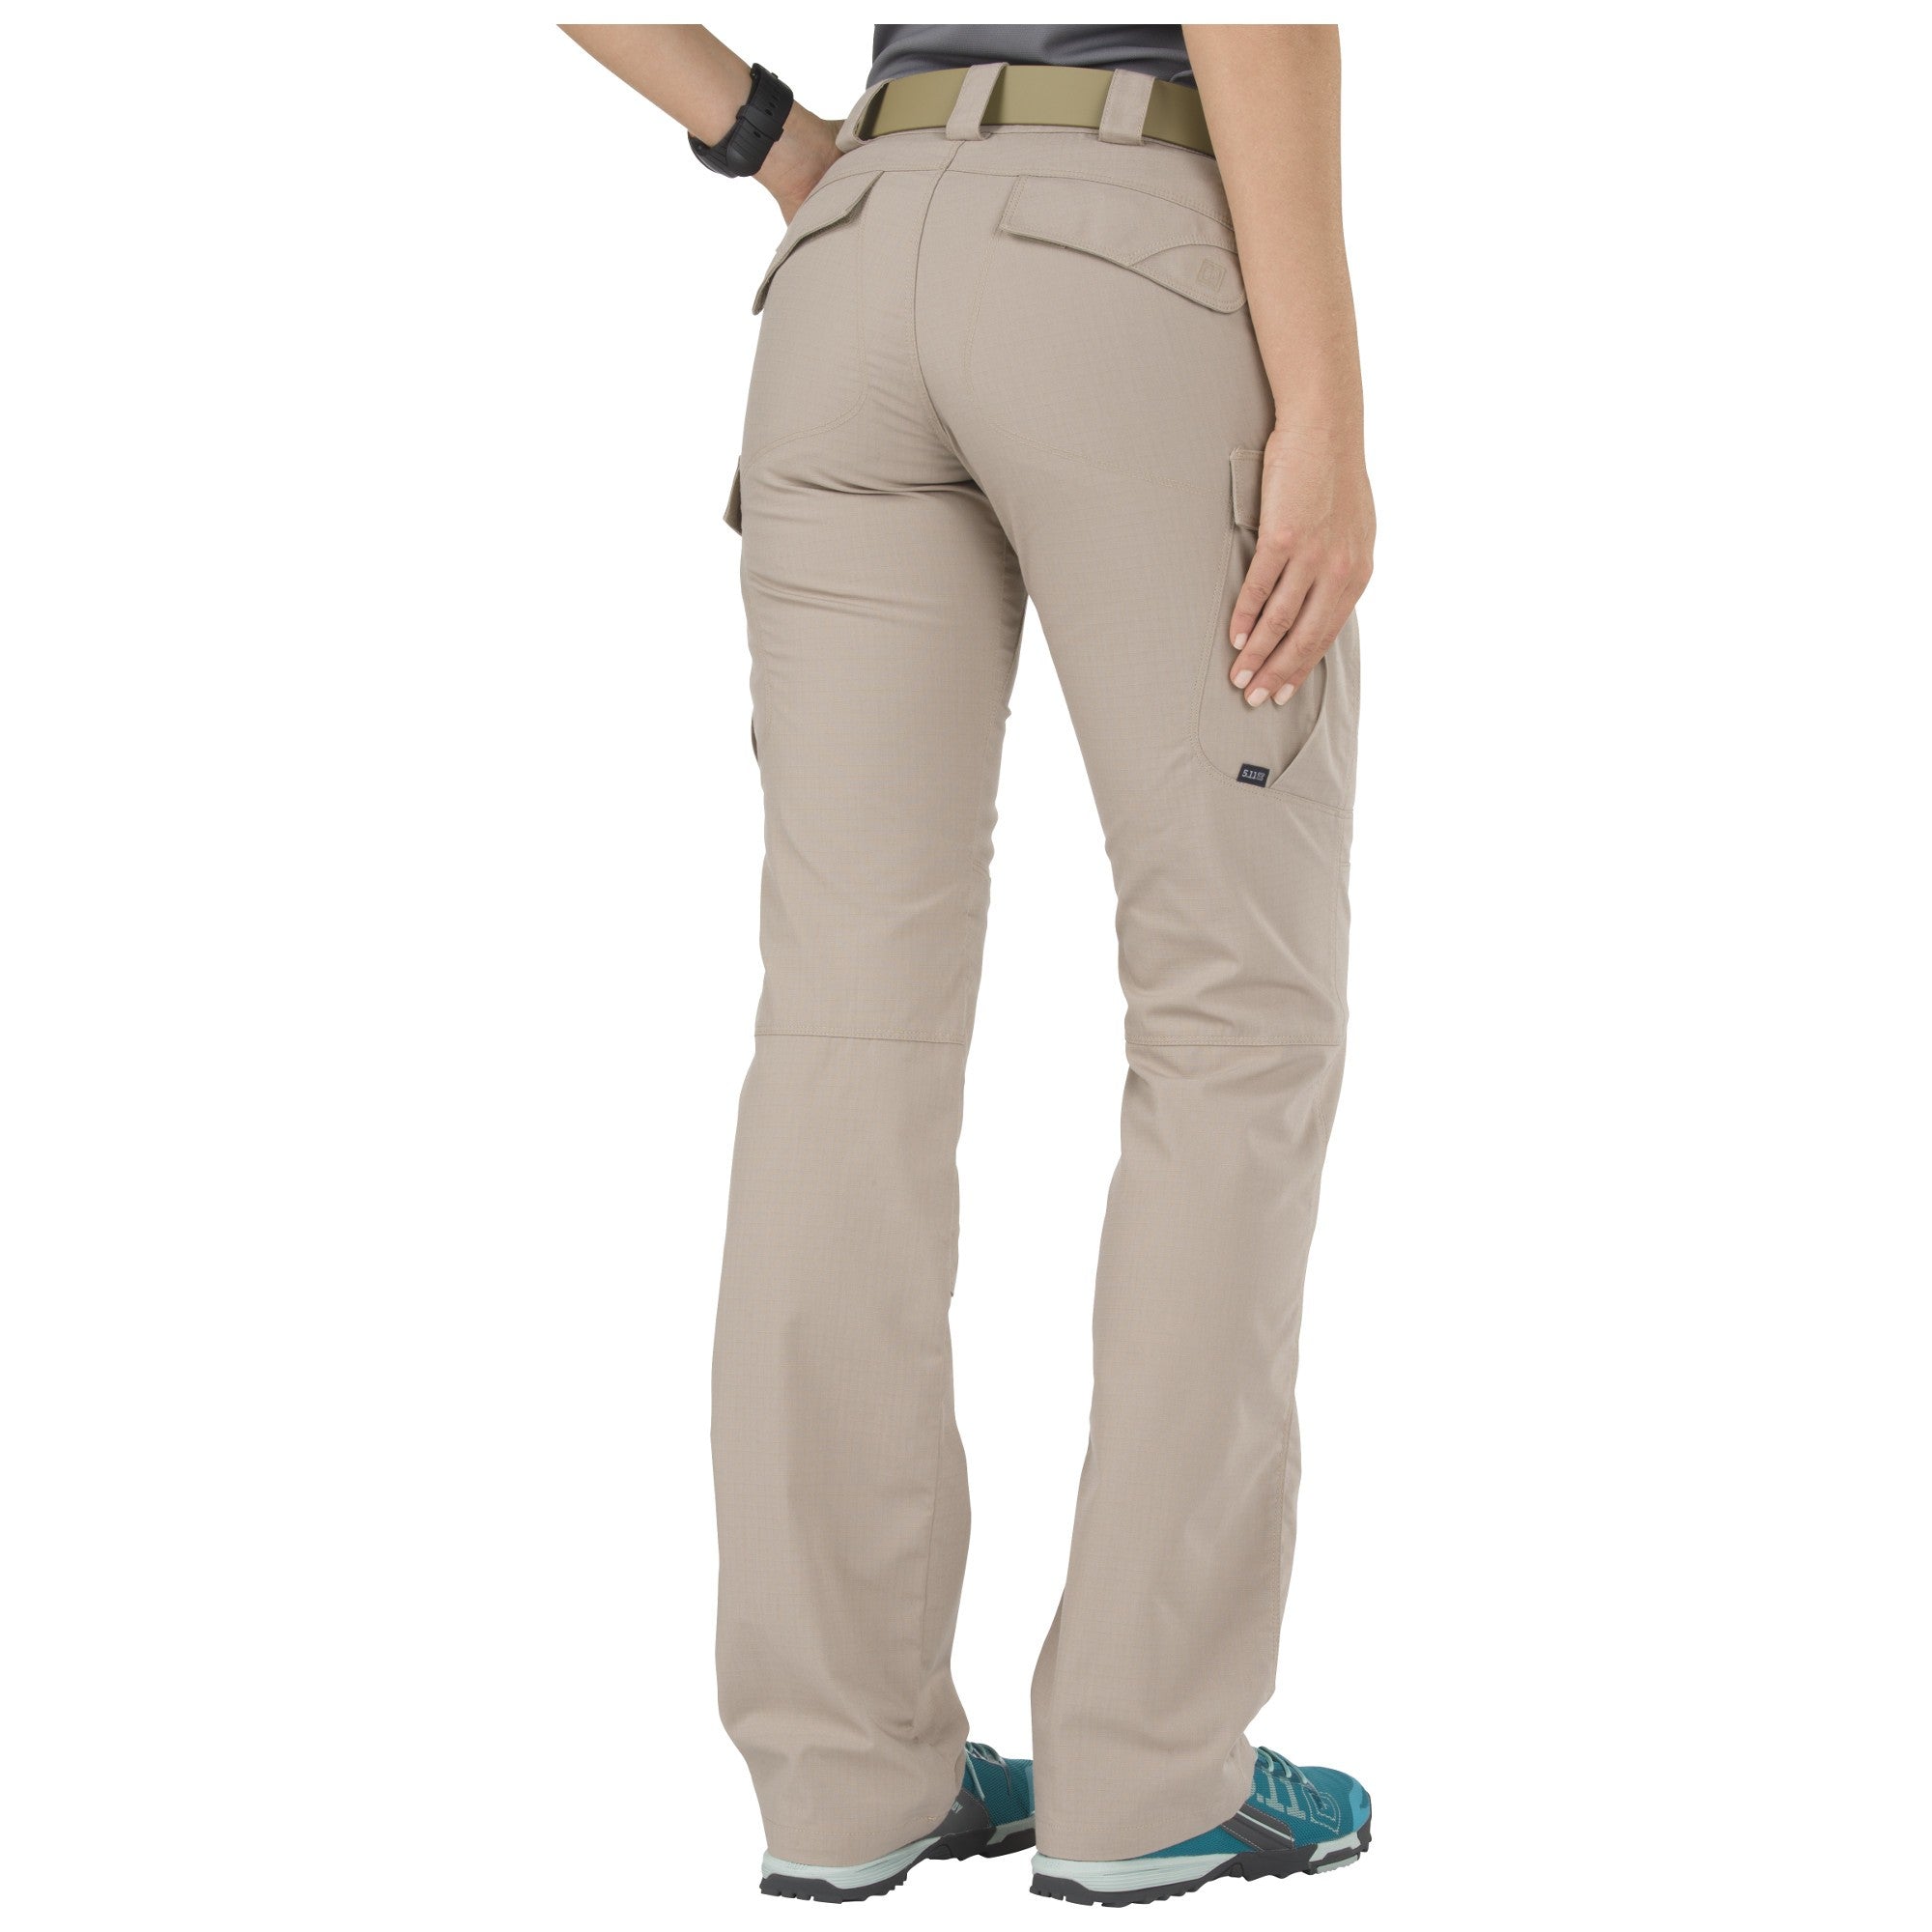 511 Tactical Stryke Pant  Womens Dark Navy 6L  1 out of 176 models